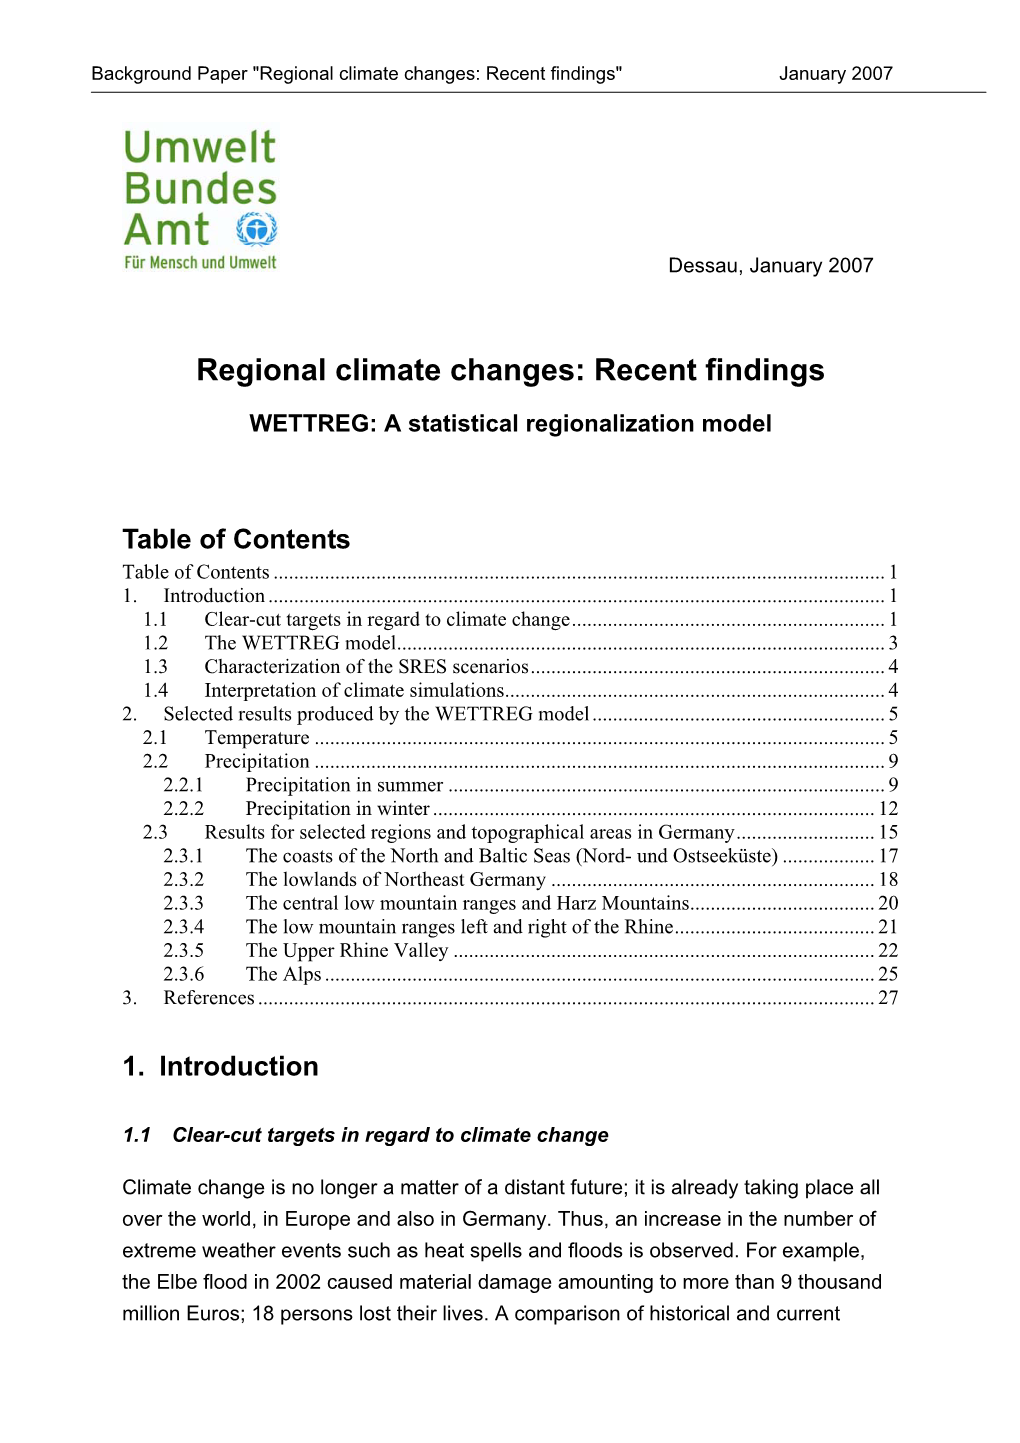 Regional Climate Changes: Recent Findings" January 2007